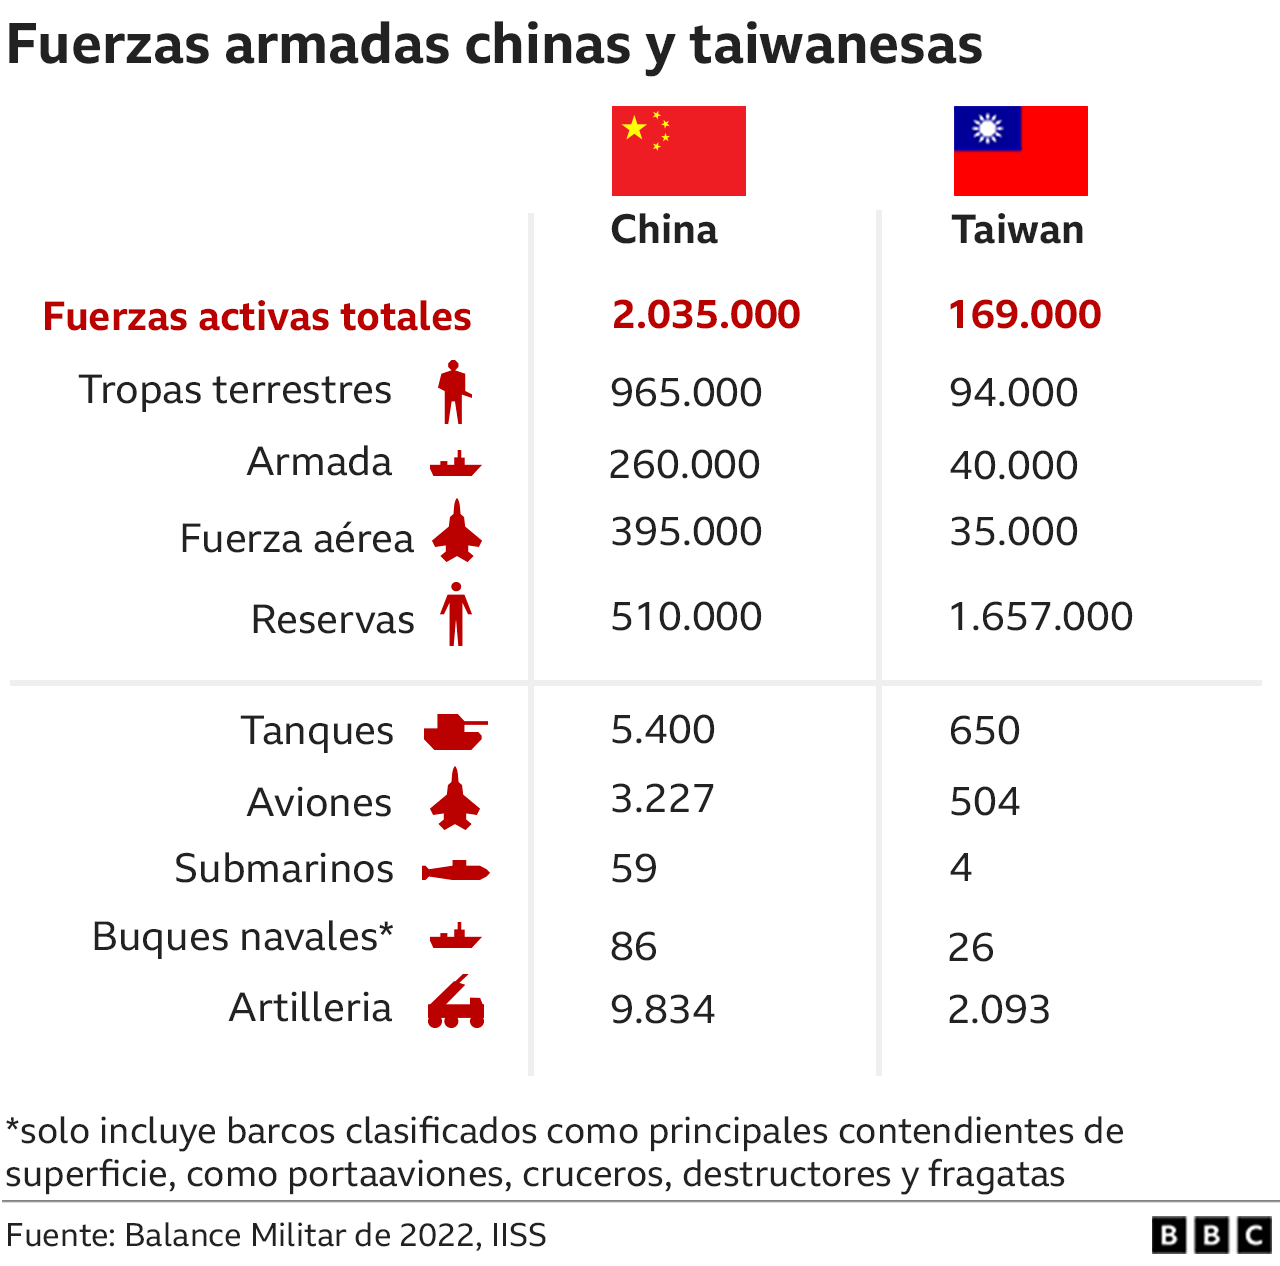 Comparison of Chinese and Taiwanese forces.